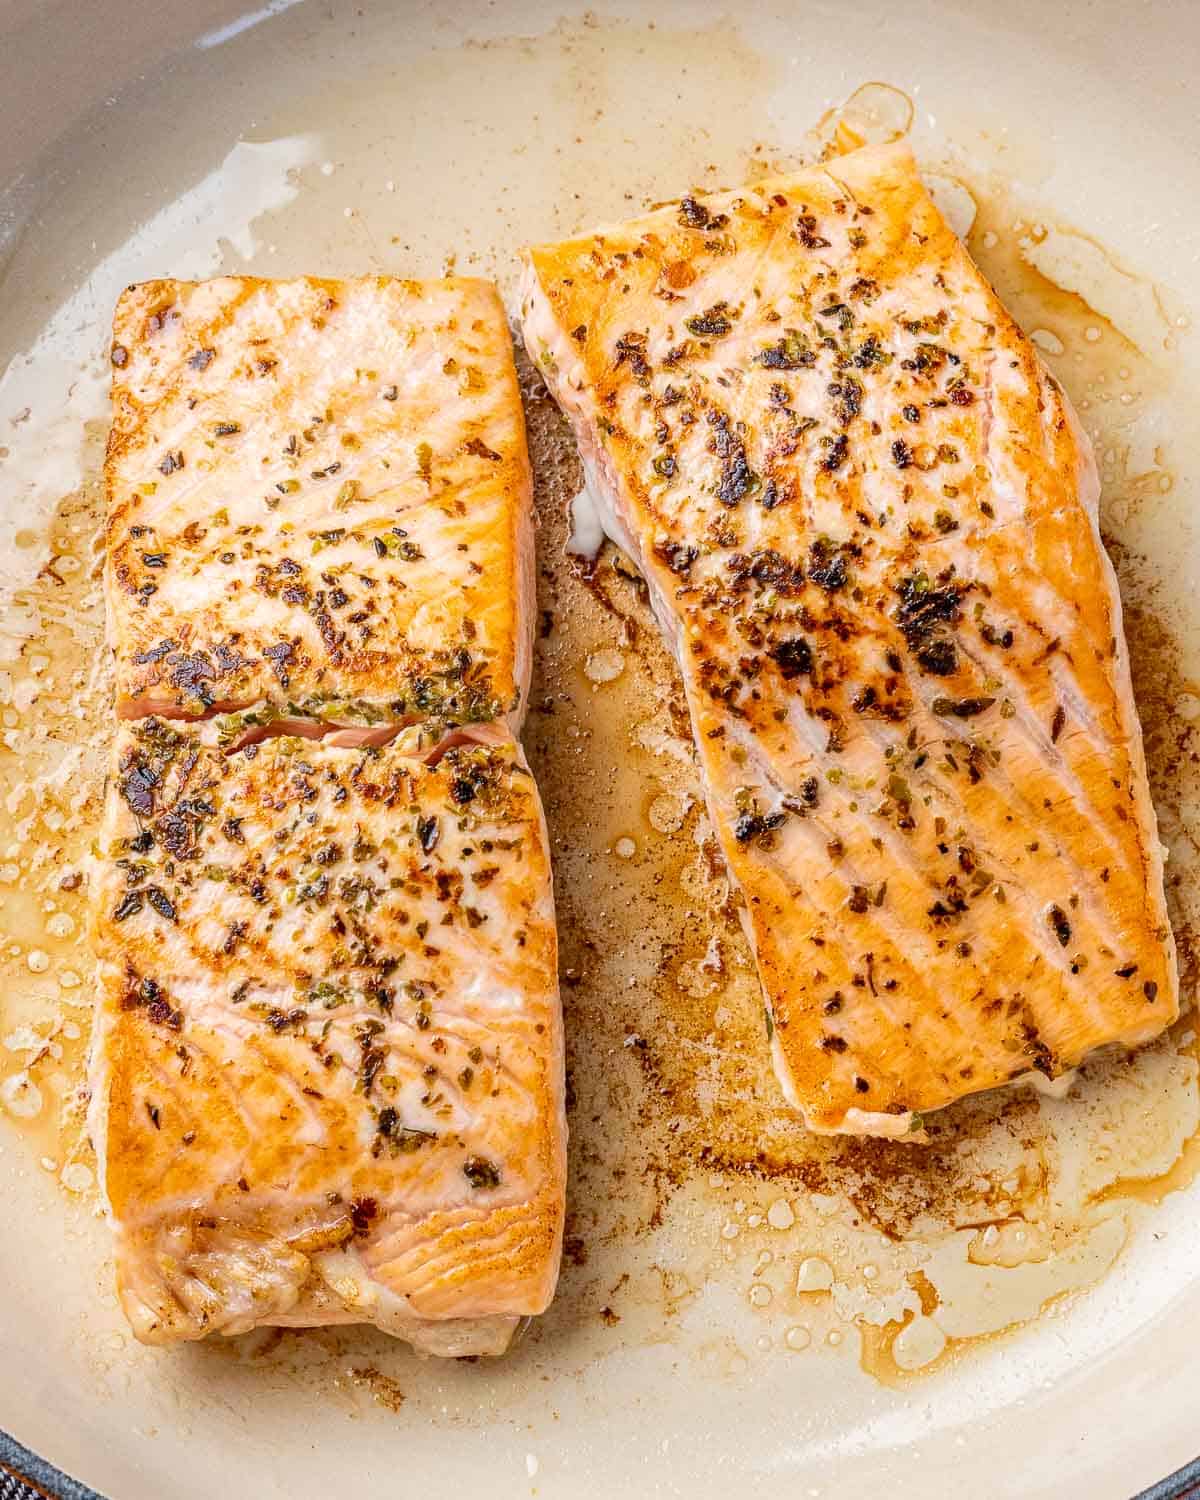 Two salmon filets searing in skillet until golden.